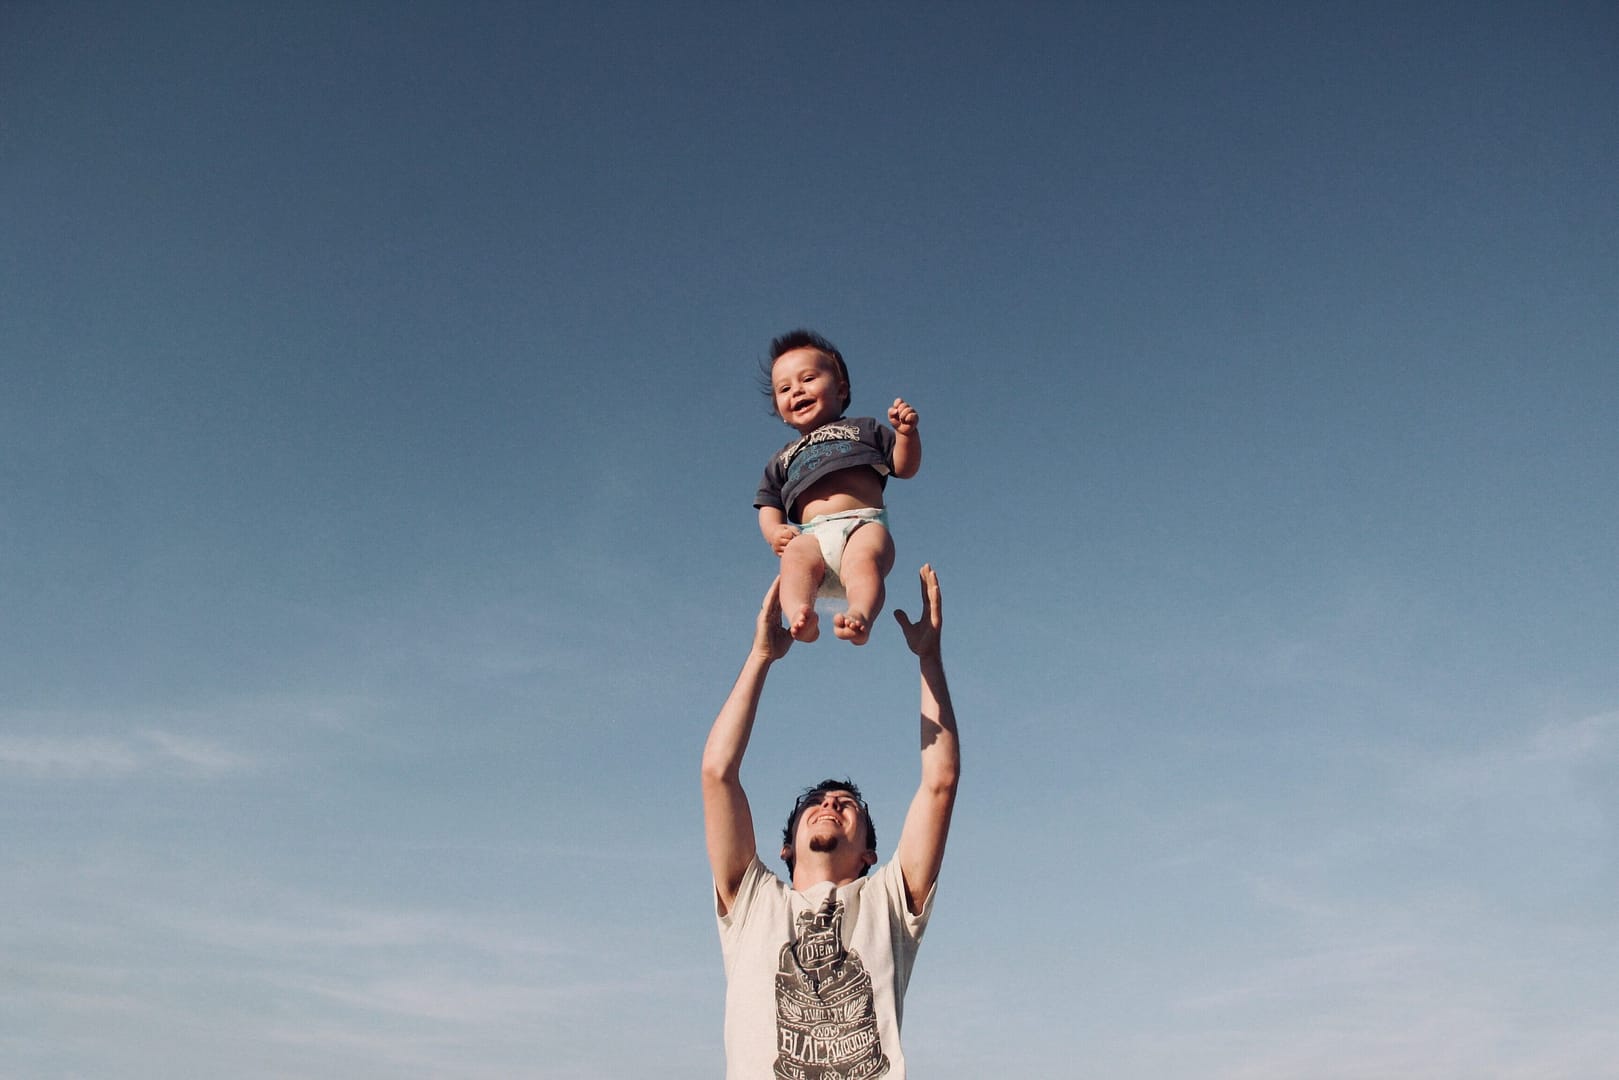 Man tossing happy baby up into the air